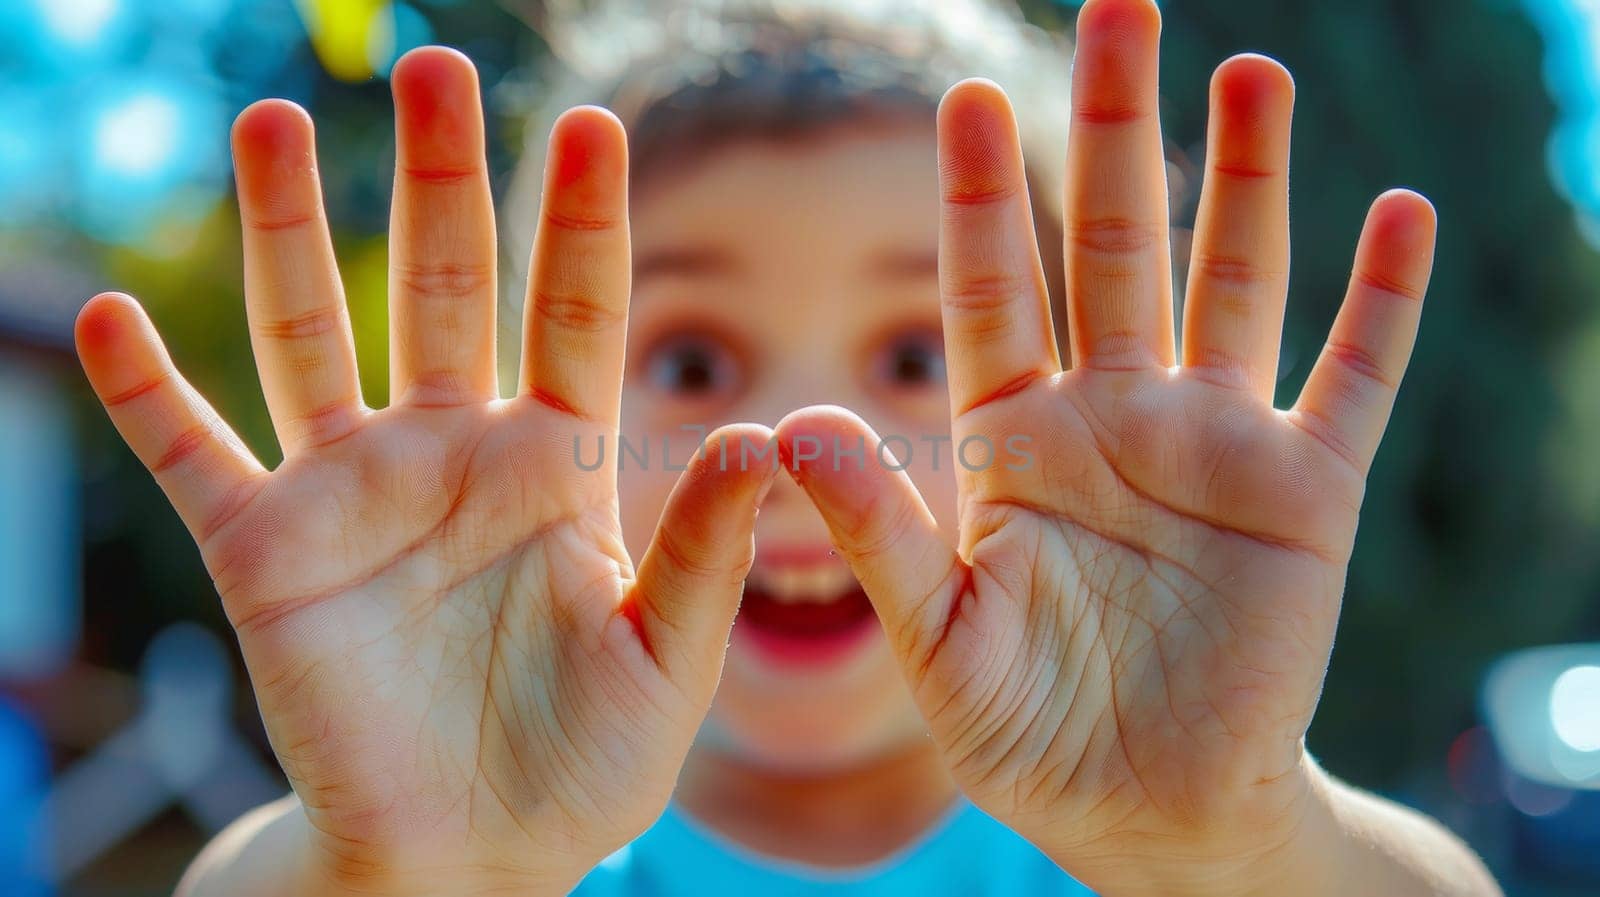 A young child with hands outstretched in front of a camera